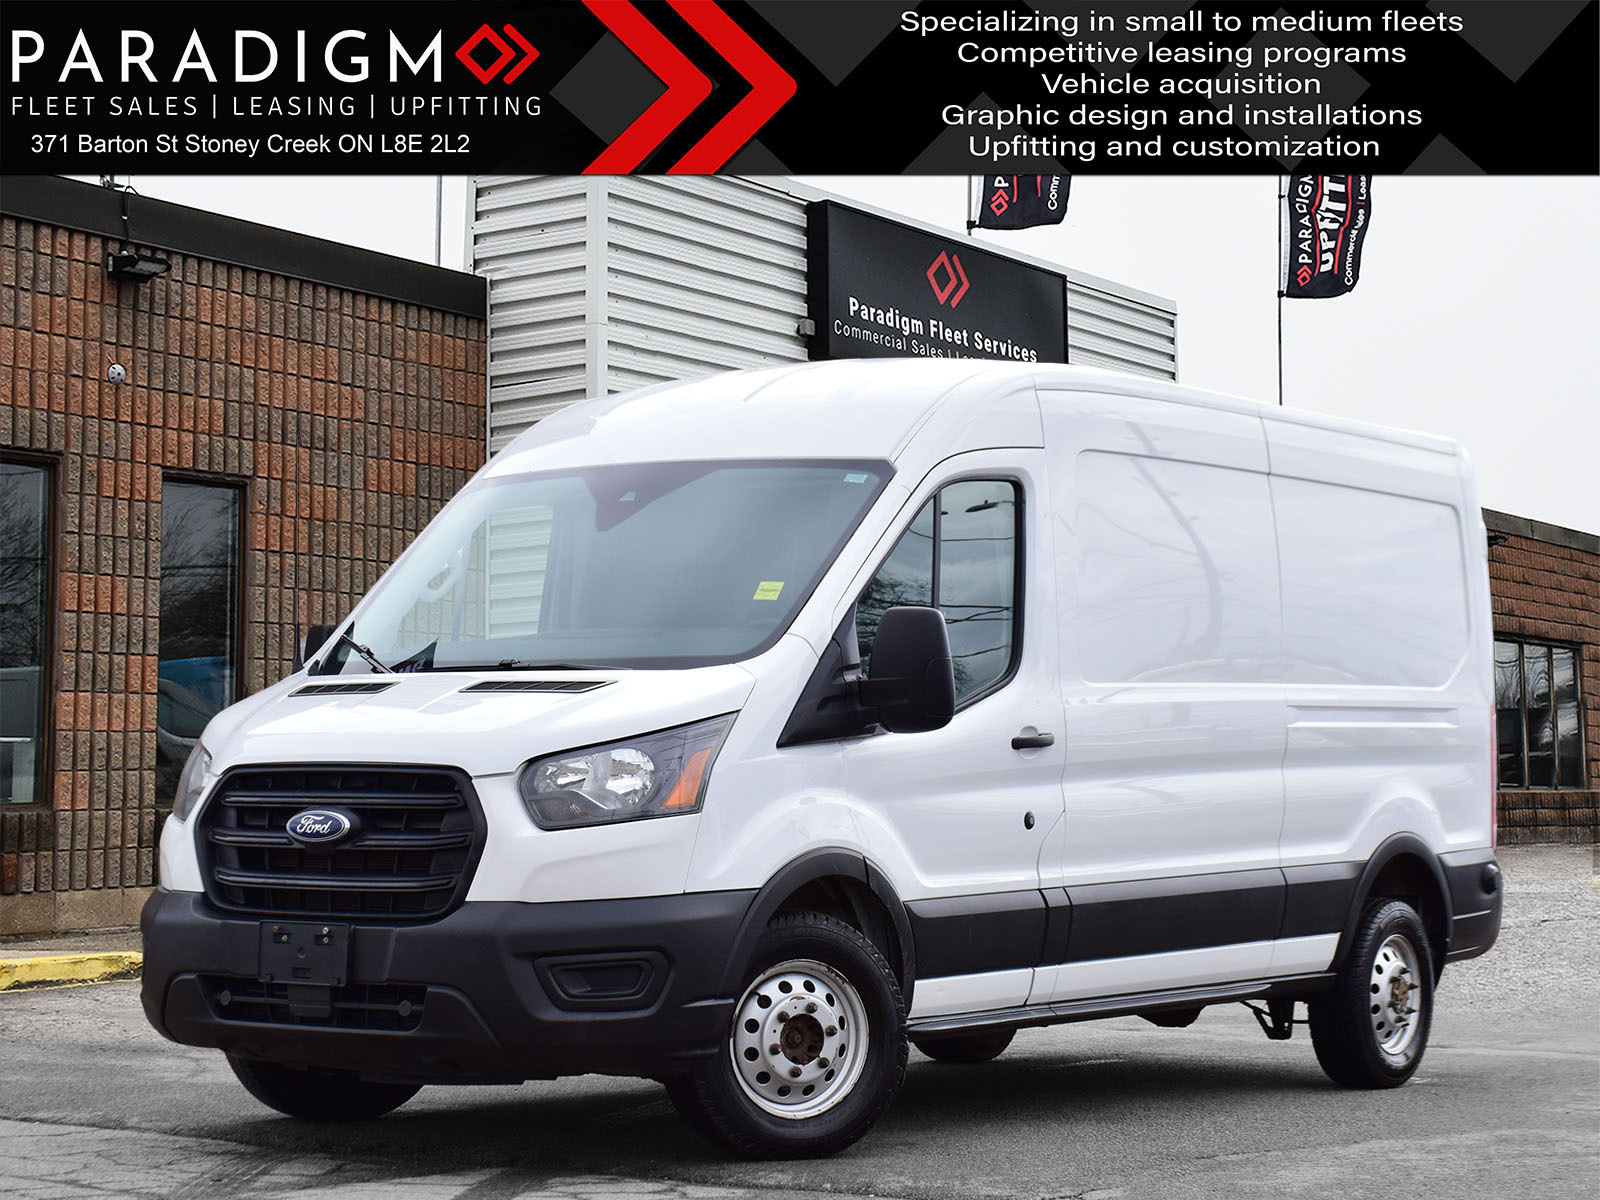 2020 Ford Transit Crew Van Ecoboost V6 AWD T250 148-Inch WB Mid Roof Cargo